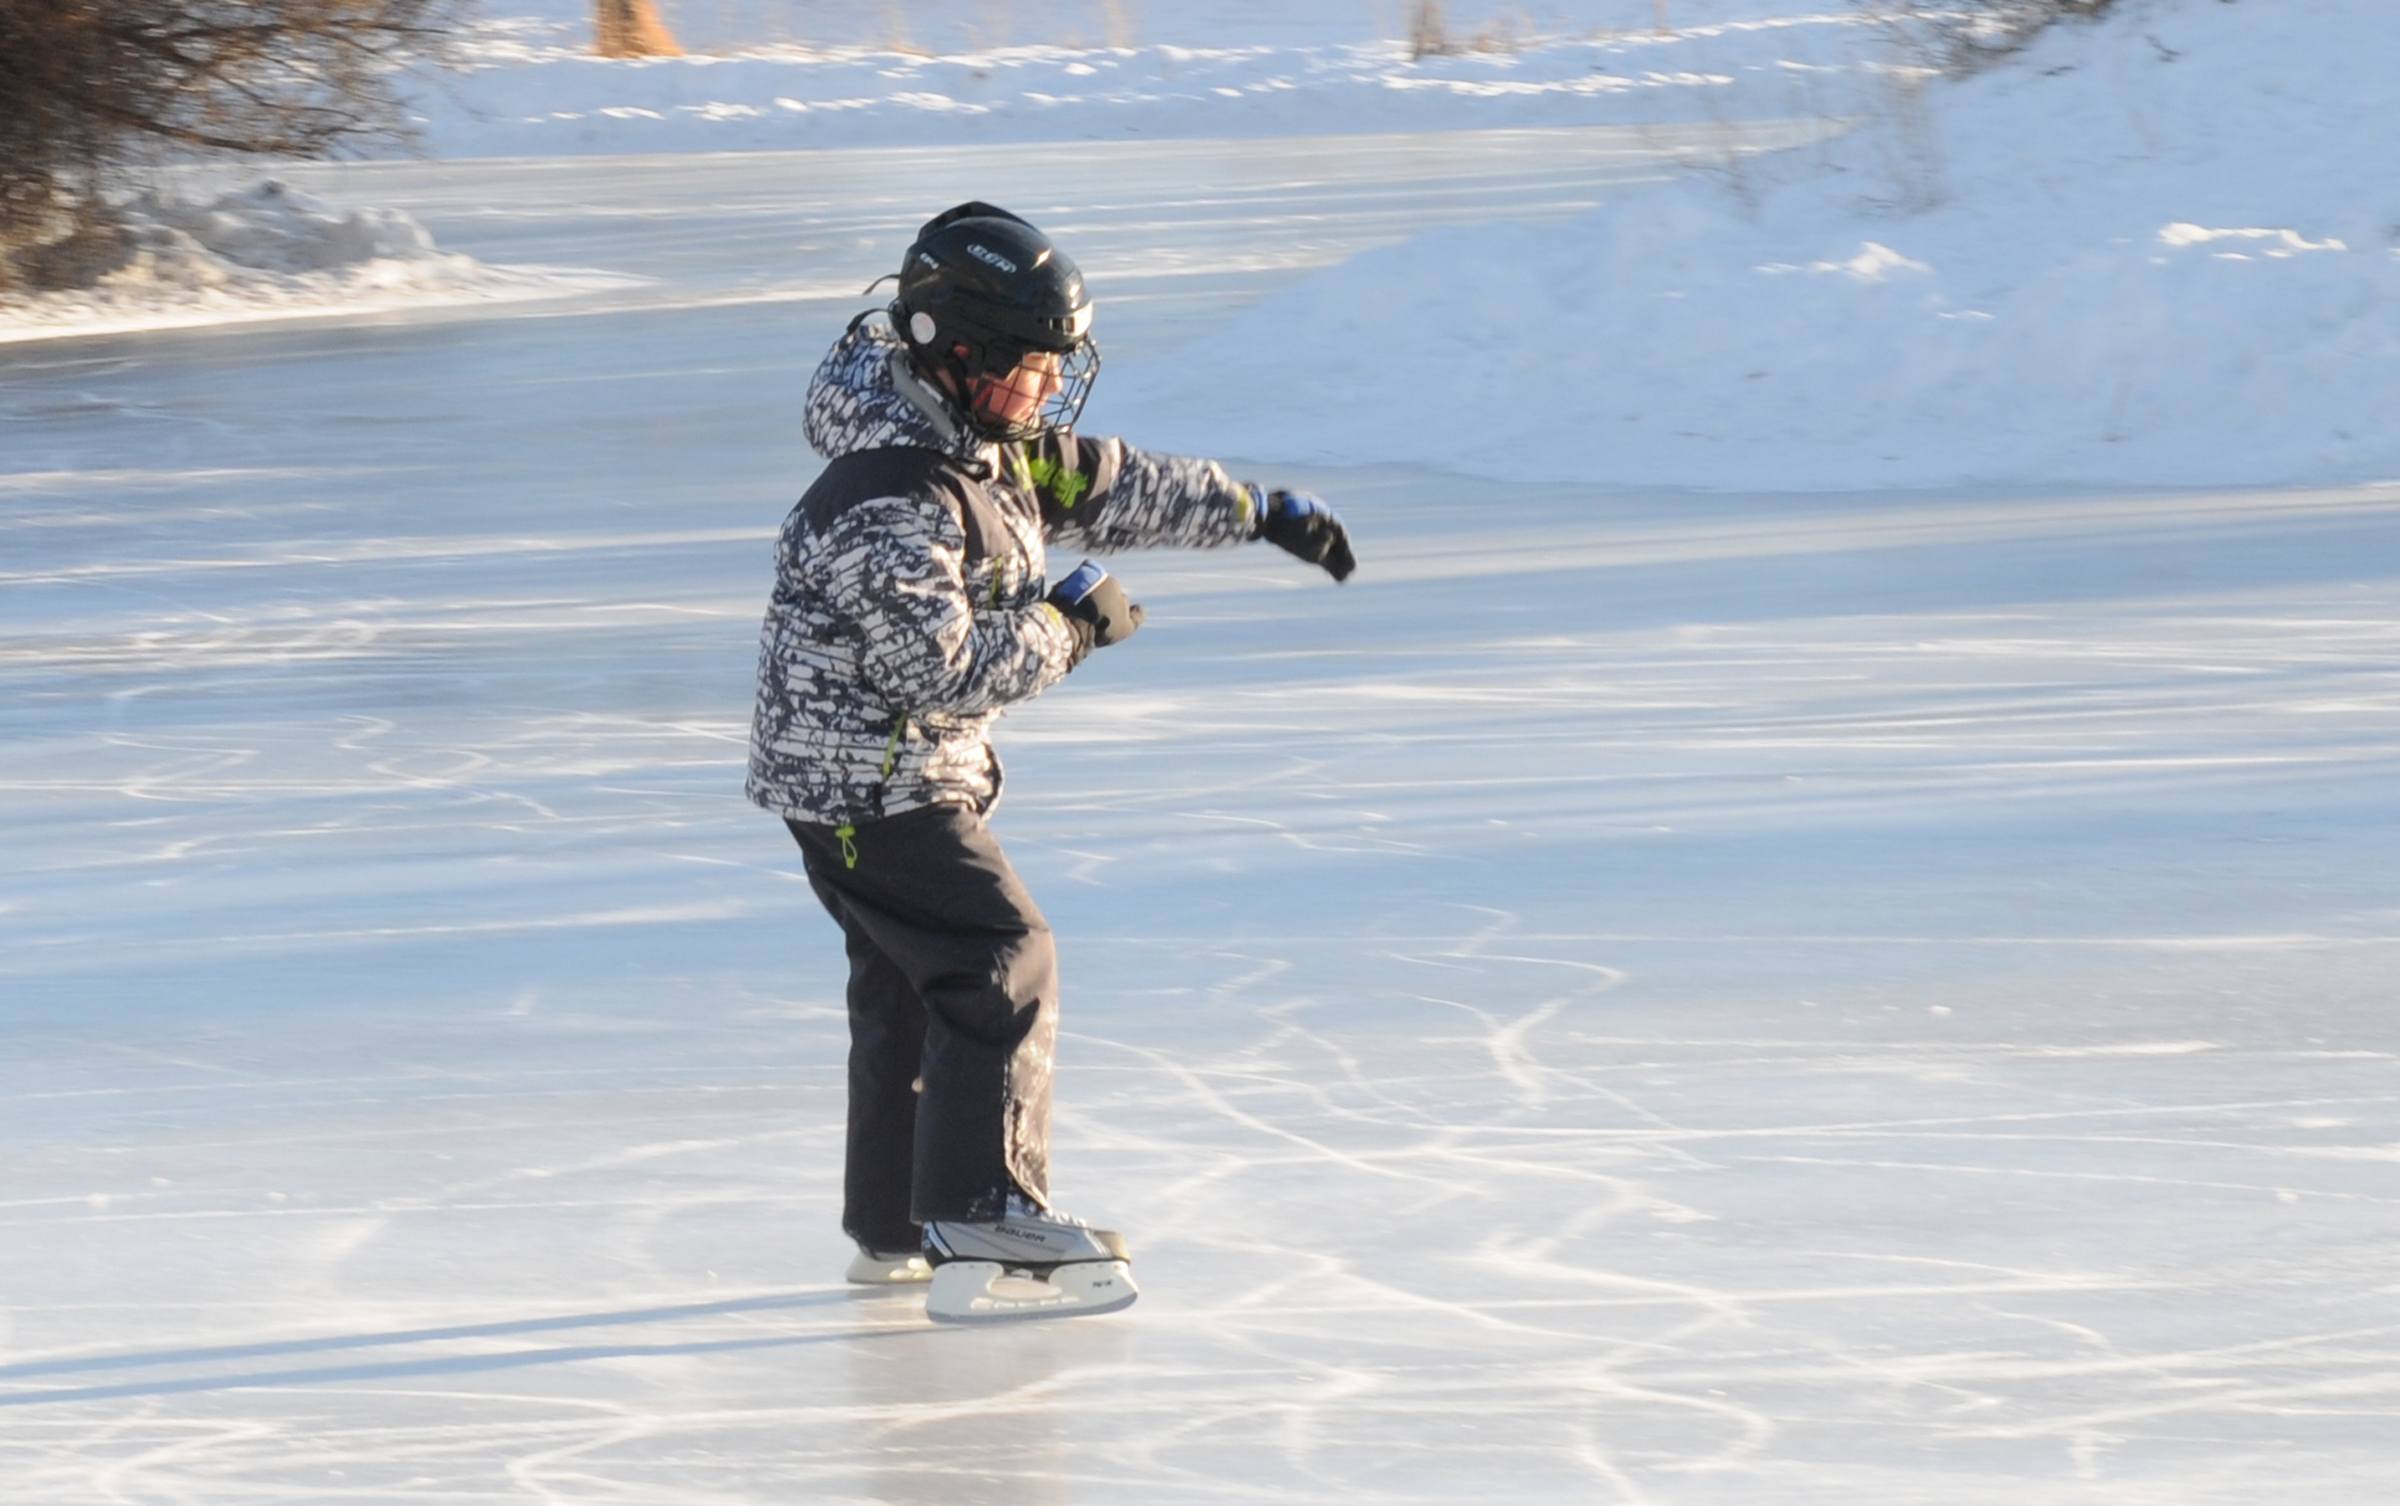 PRACTICE- Brenden Metcalfe skates around Bower Ponds recently while on an outing with his family.